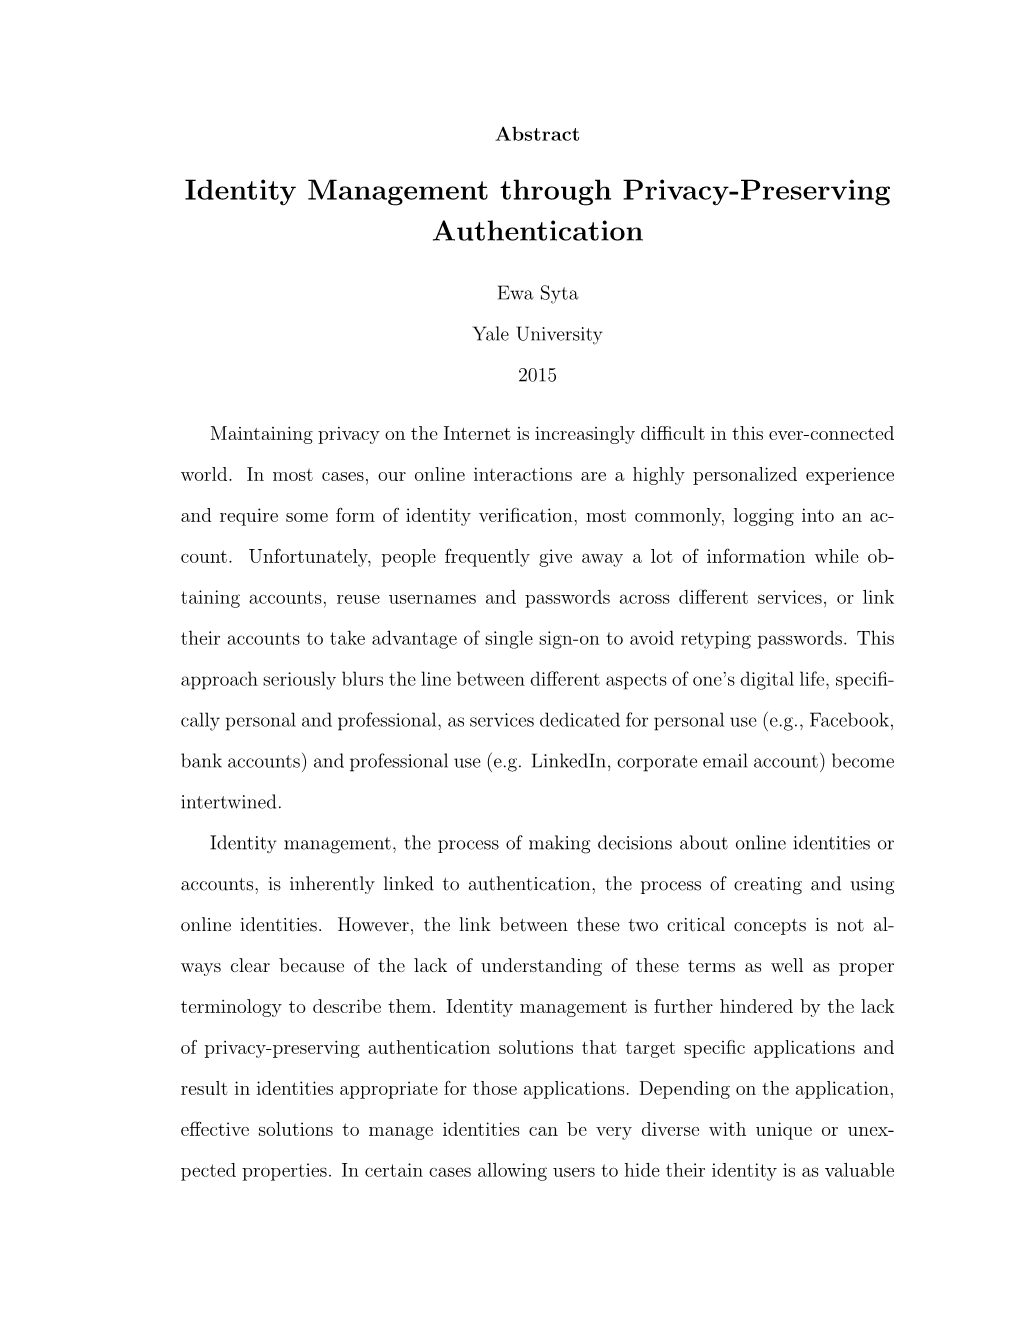 Identity Management Through Privacy-Preserving Authentication